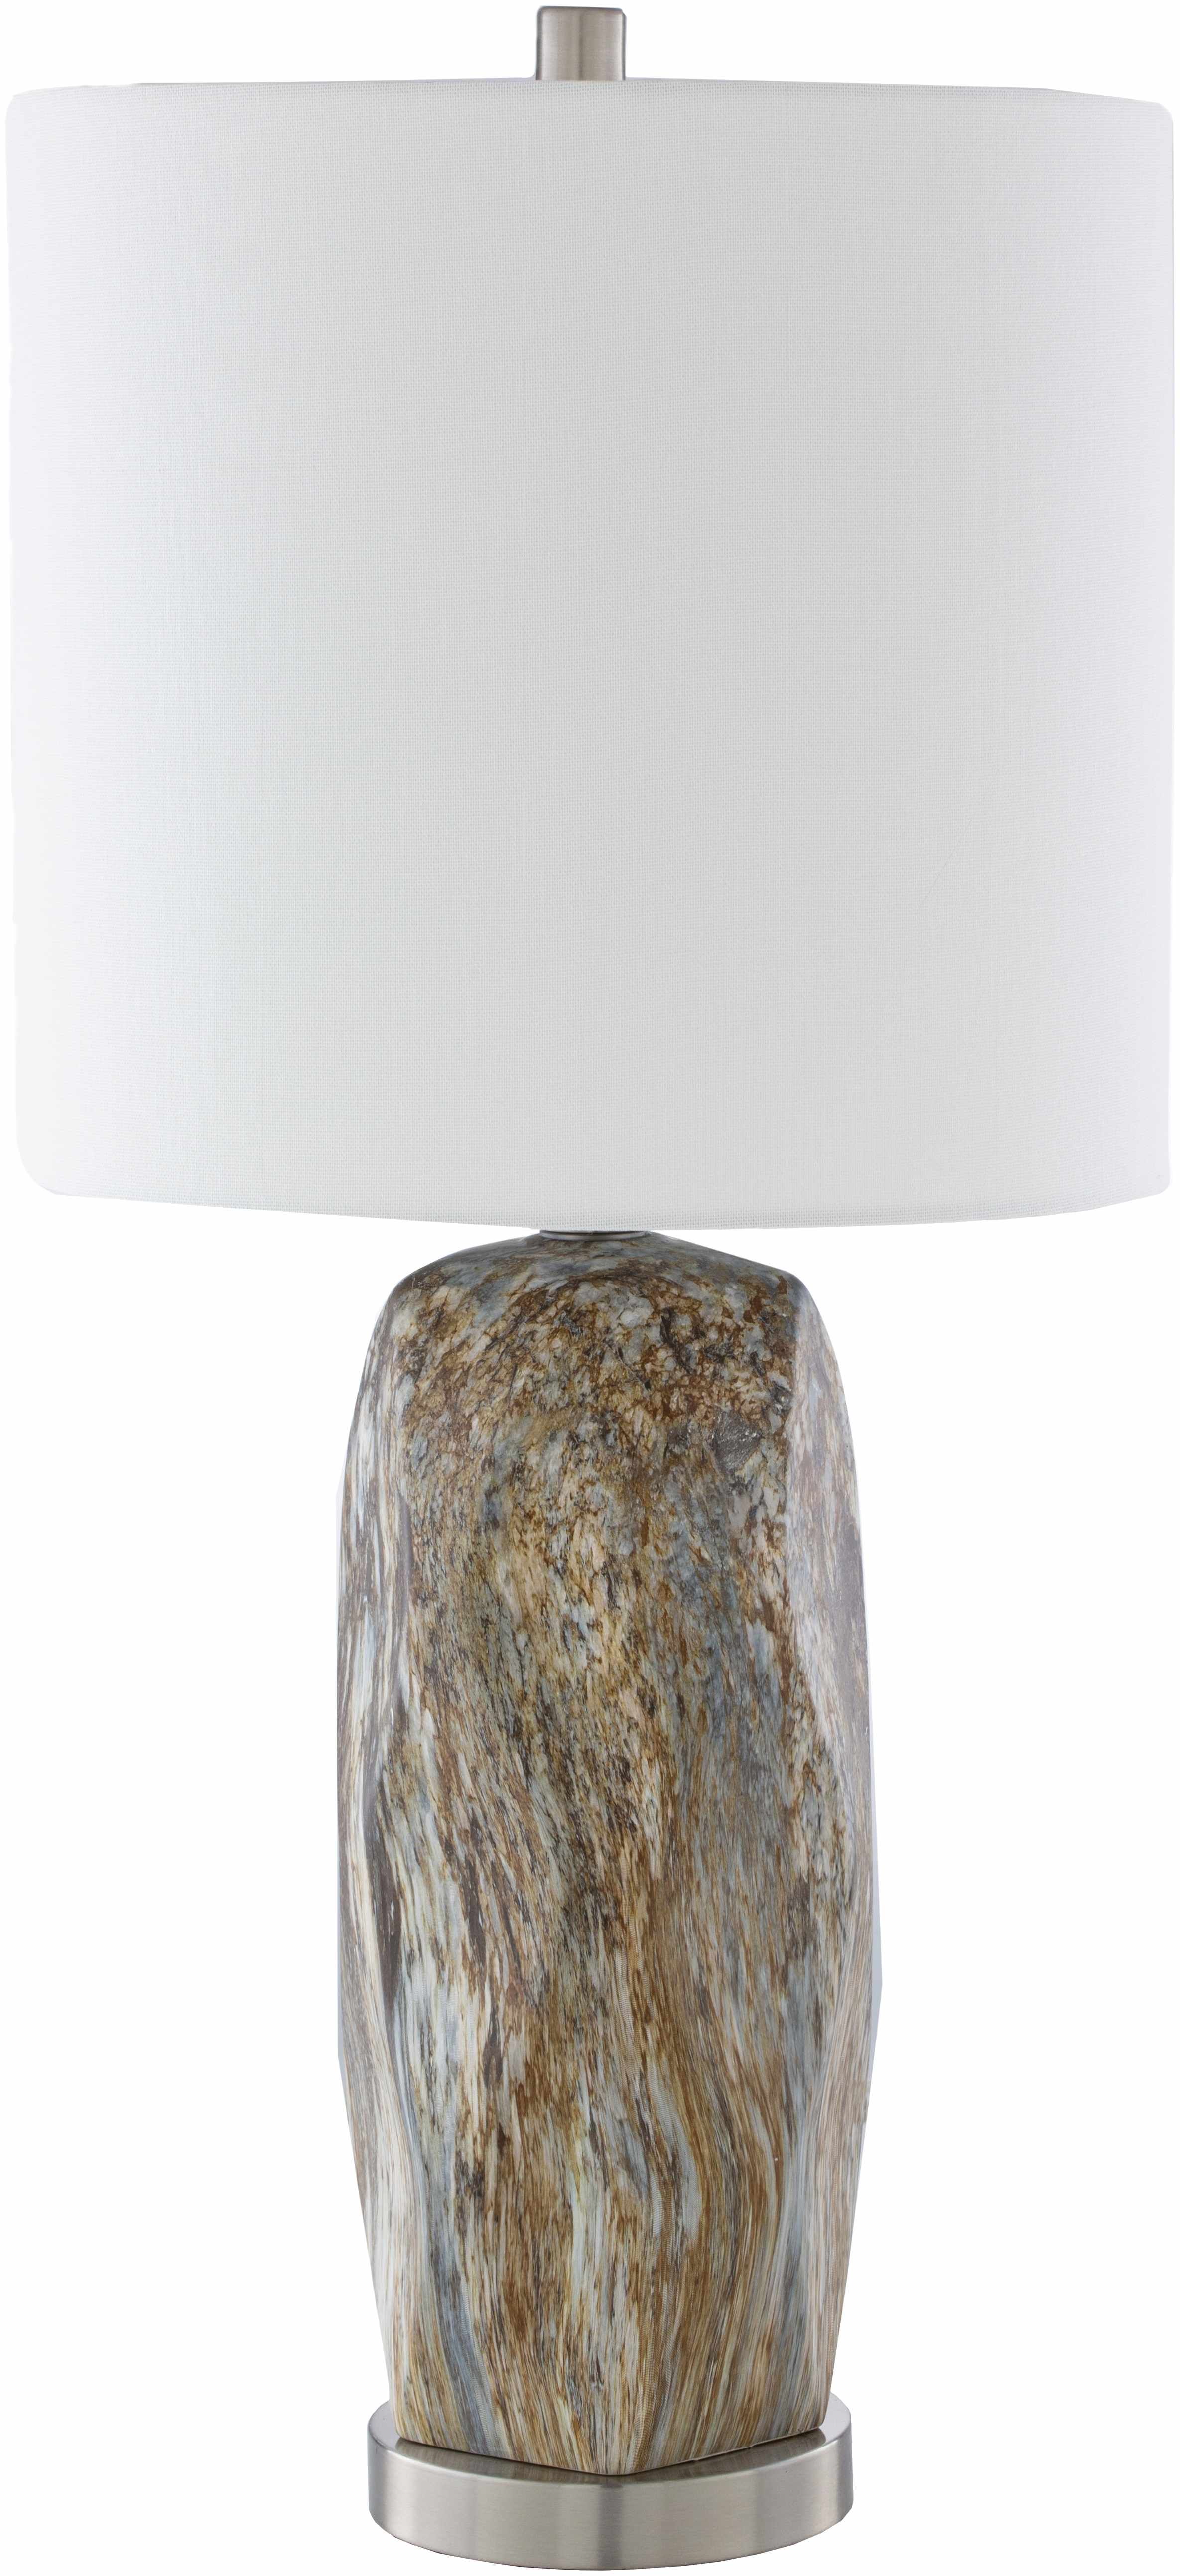 Jetafe Table Lamp | Boutique Rugs